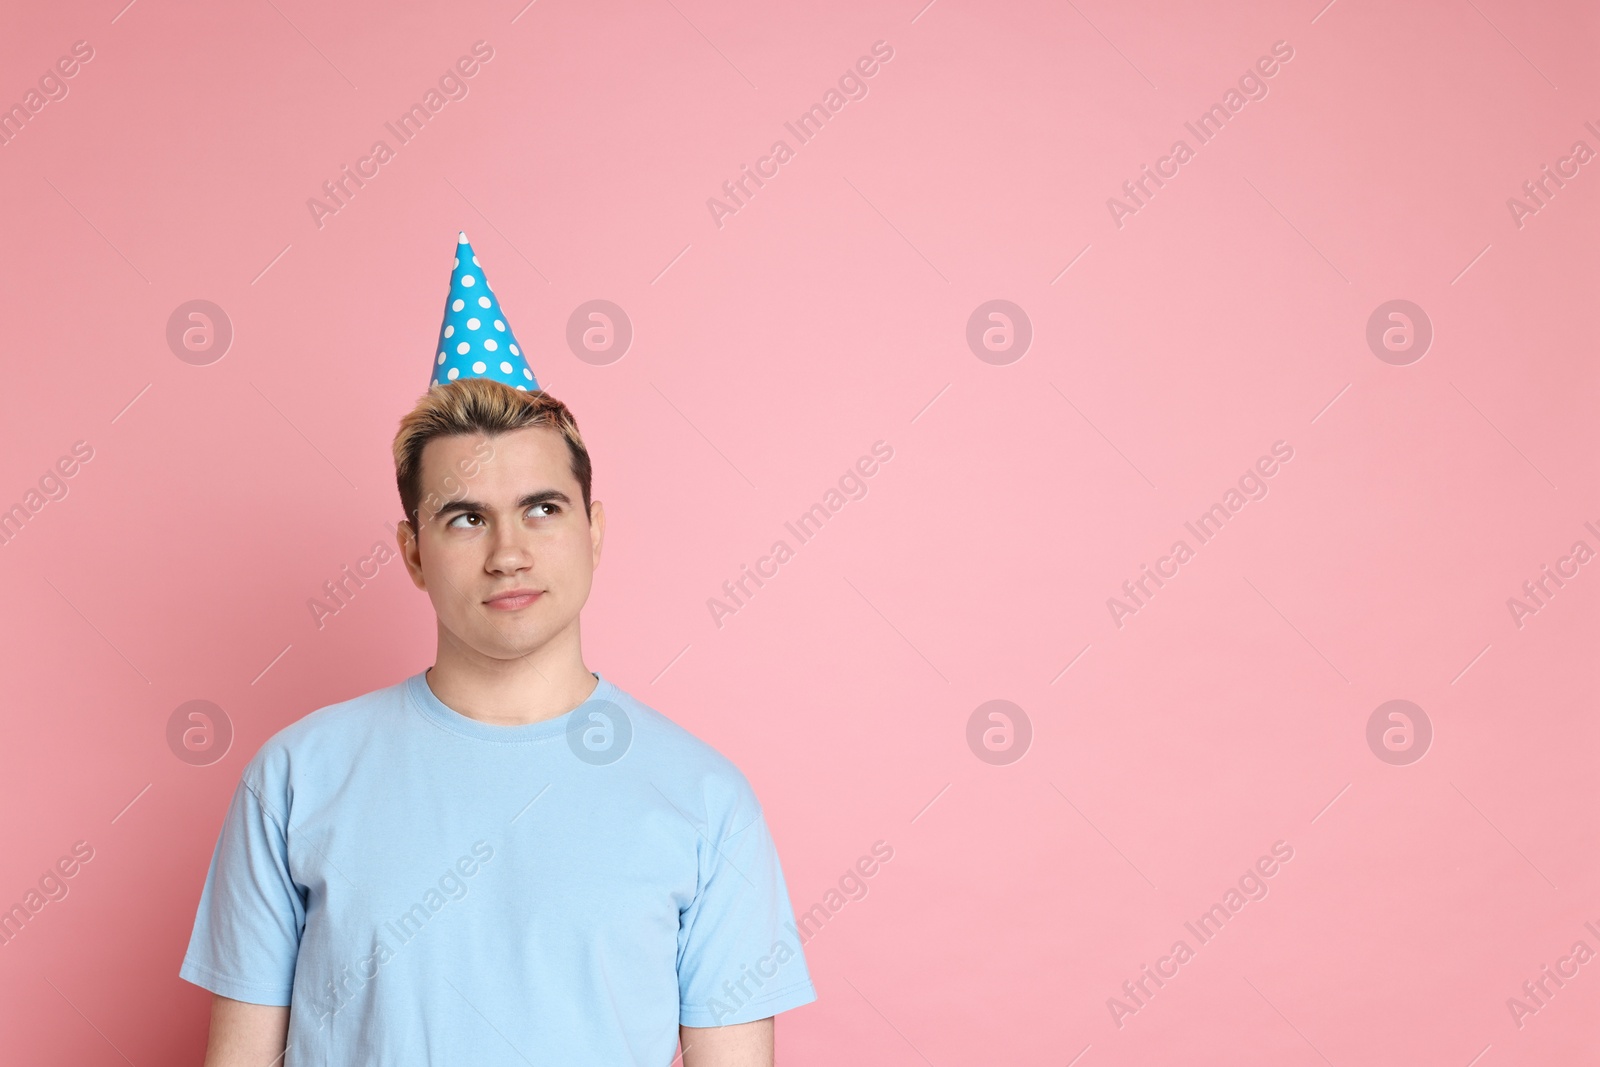 Photo of Sad young man with party hat on pink background, space for text